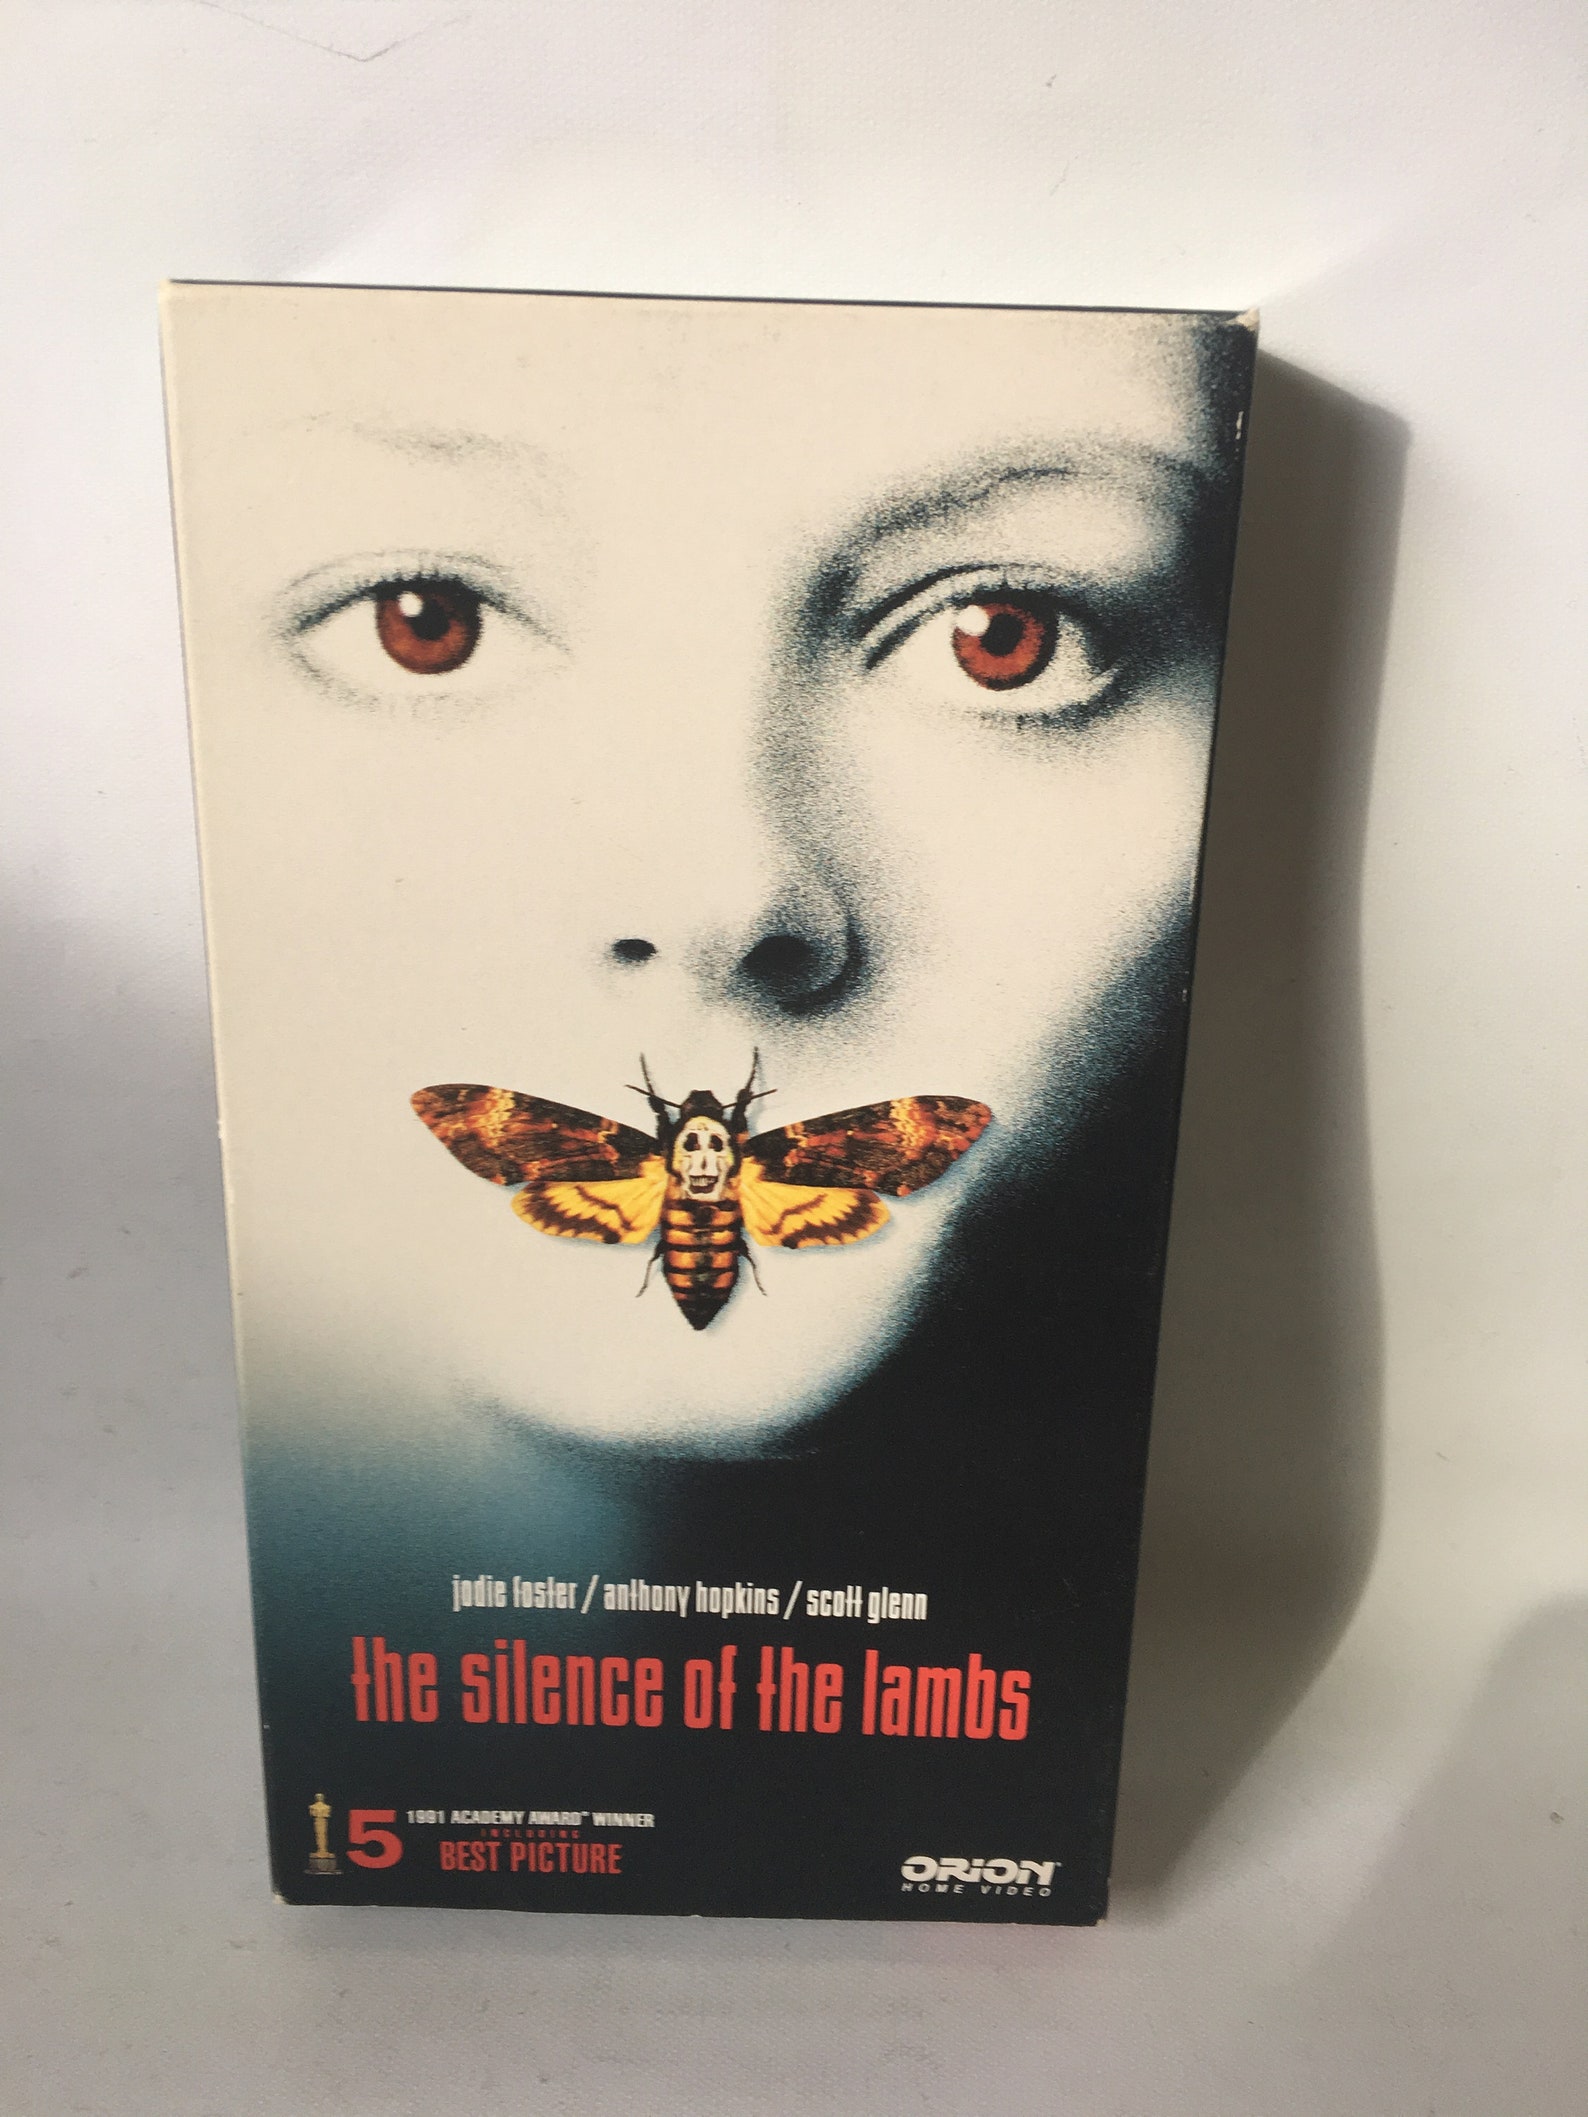 Vintage Silence Of The Lamb Vhs Tape Movie Etsy